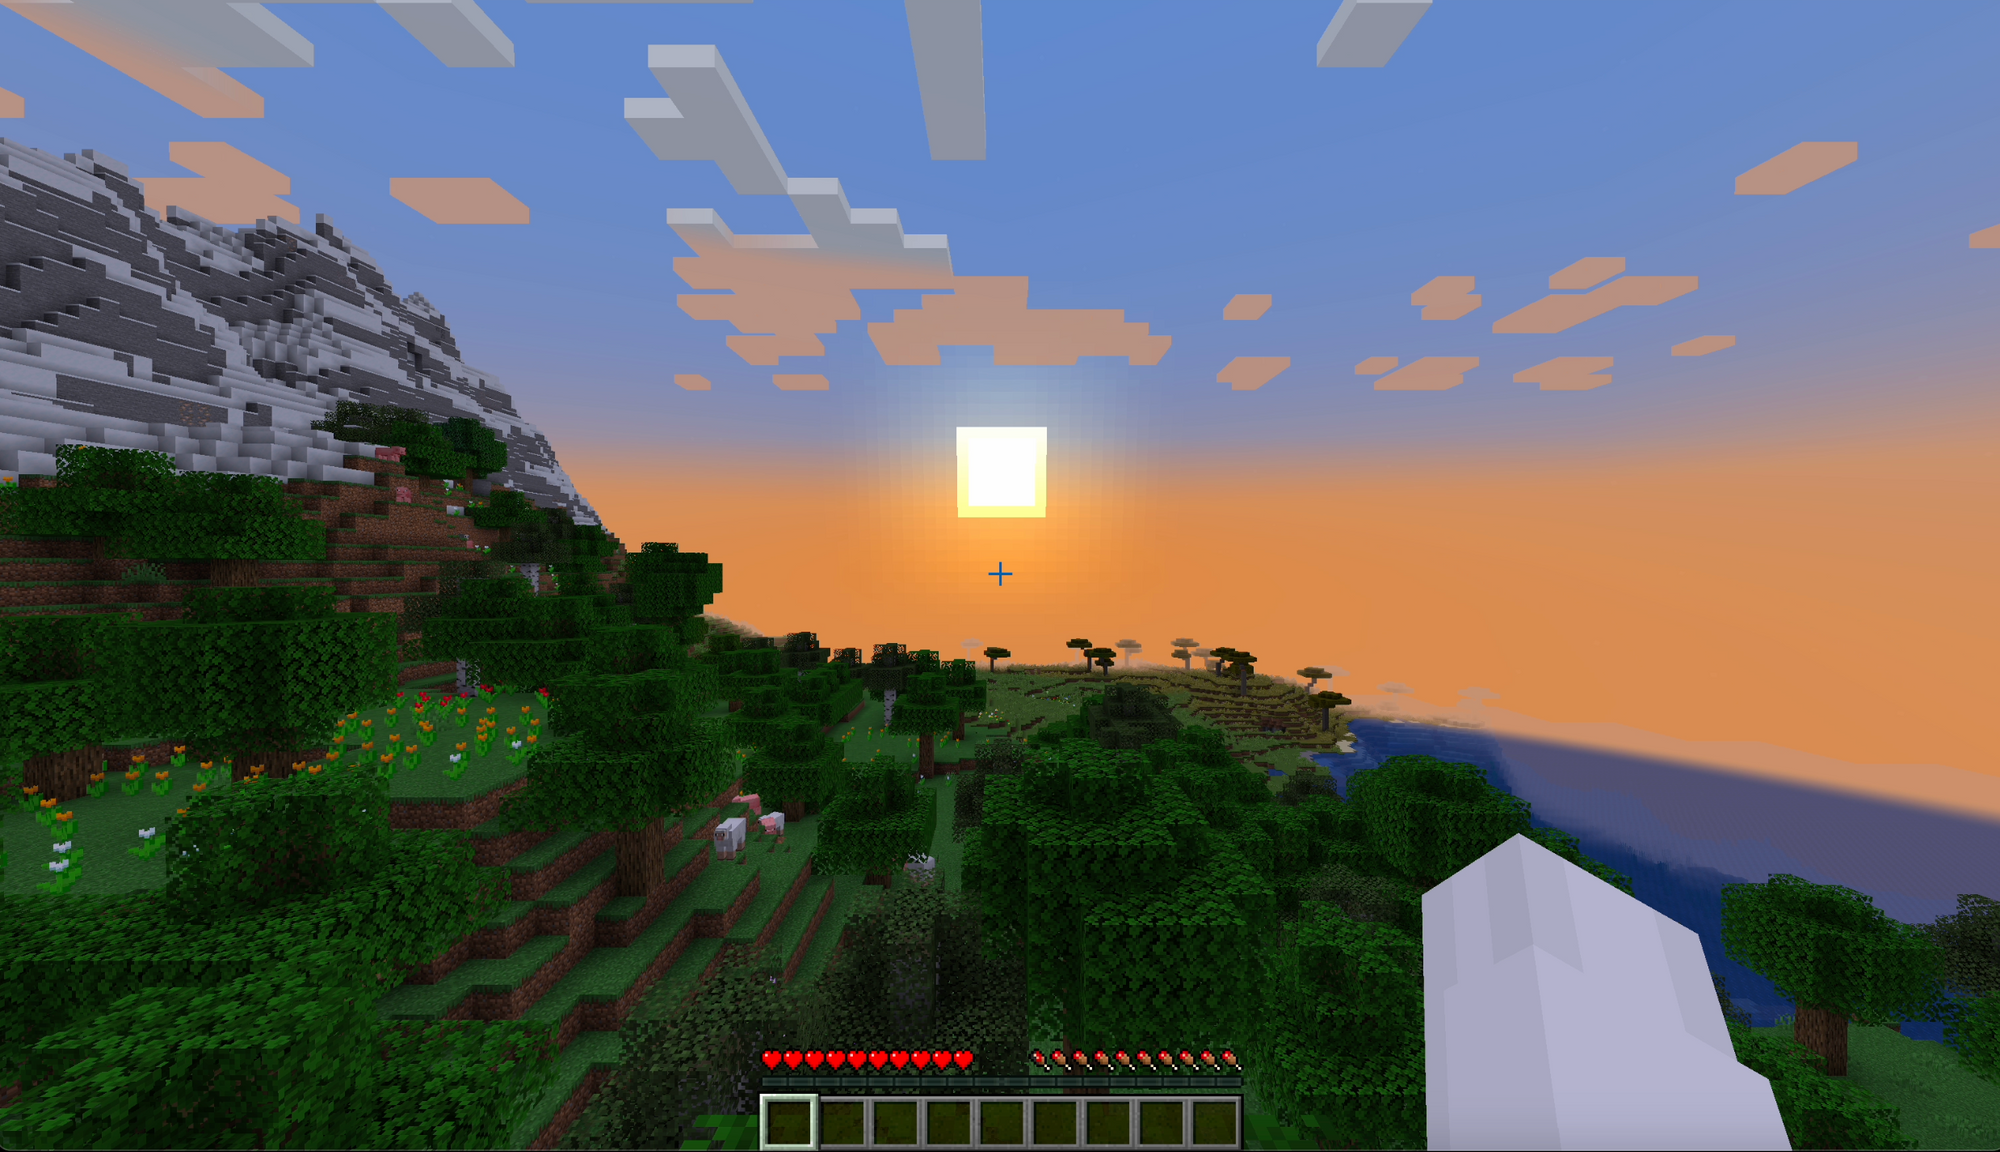 Dusk, or sunset, in a Minecraft world